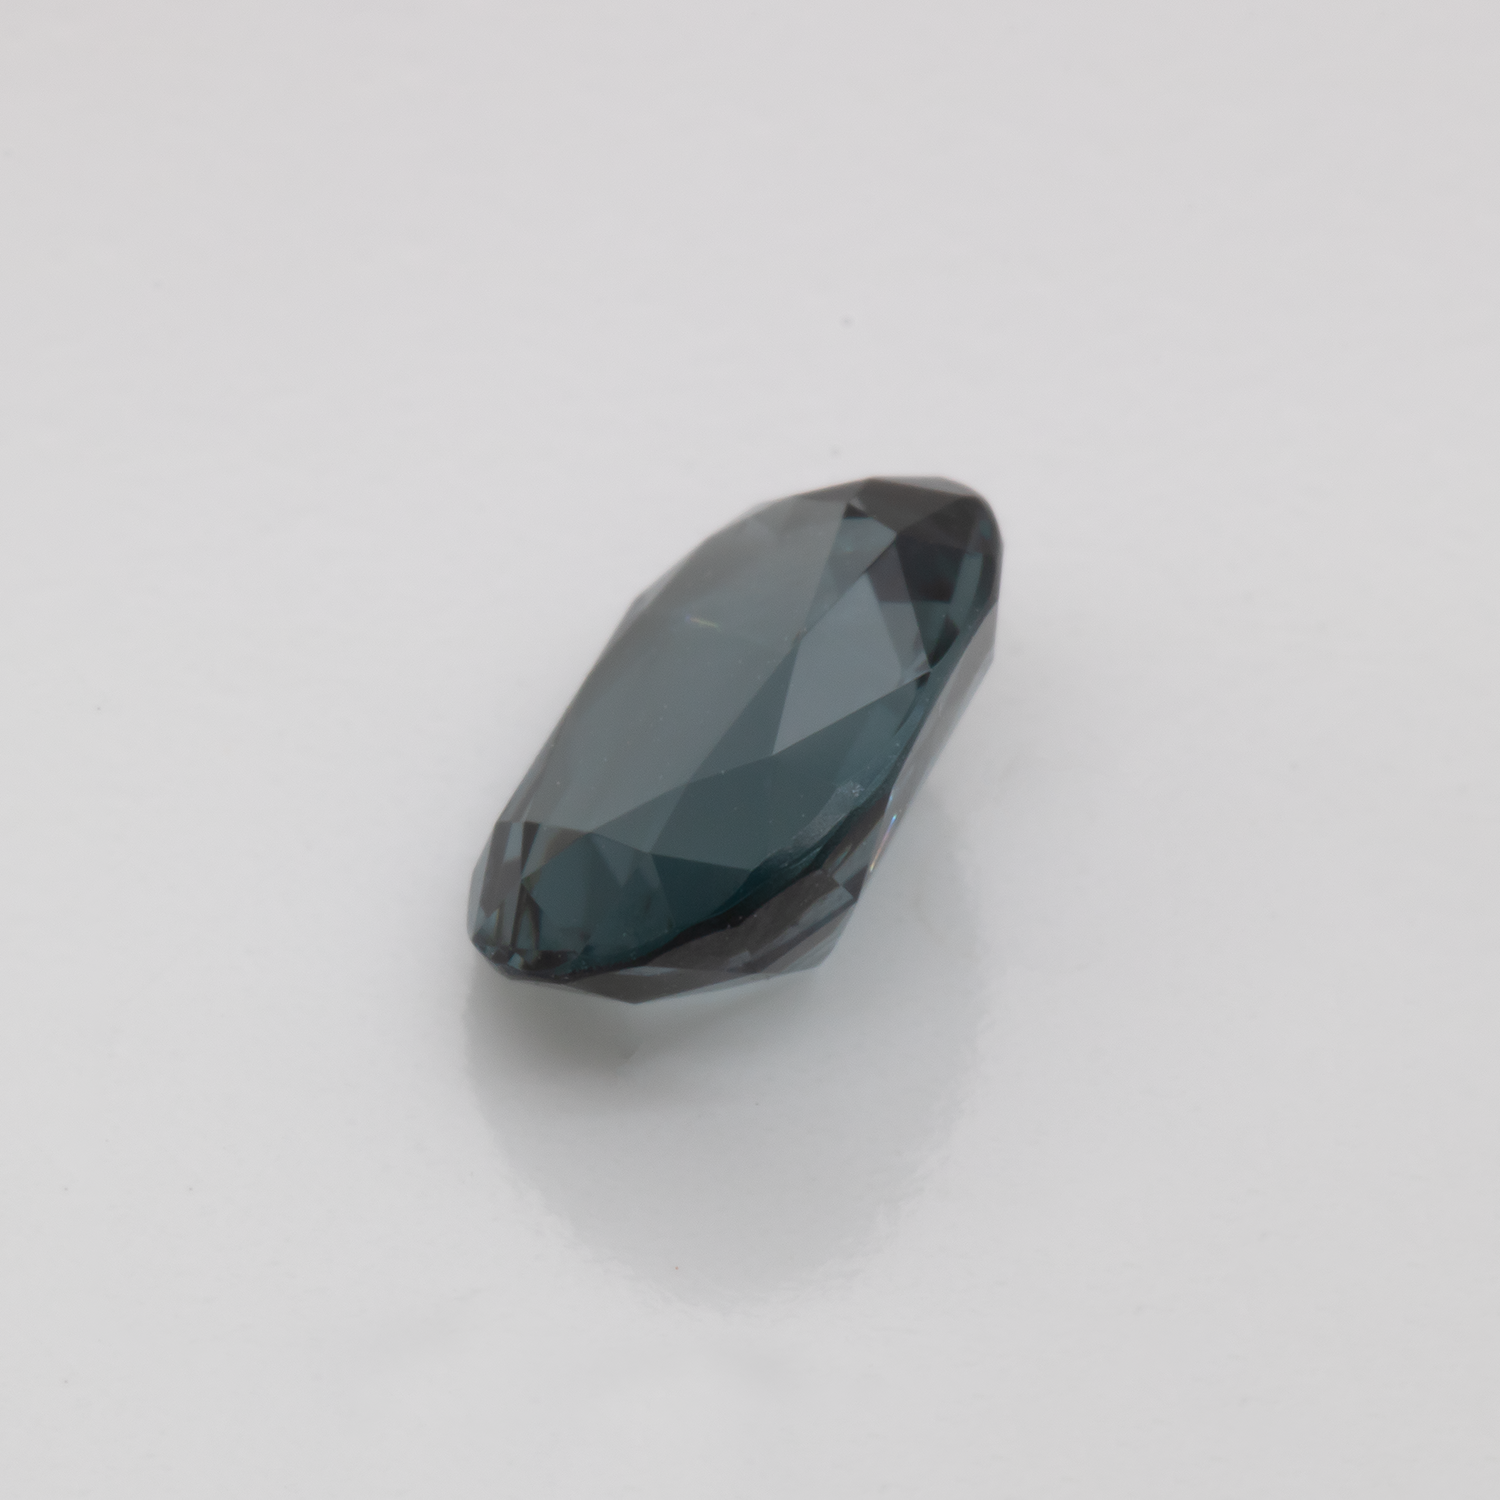 Spinel - grey, oval, 8.5x6 mm, 1.53 cts, No. SP90055